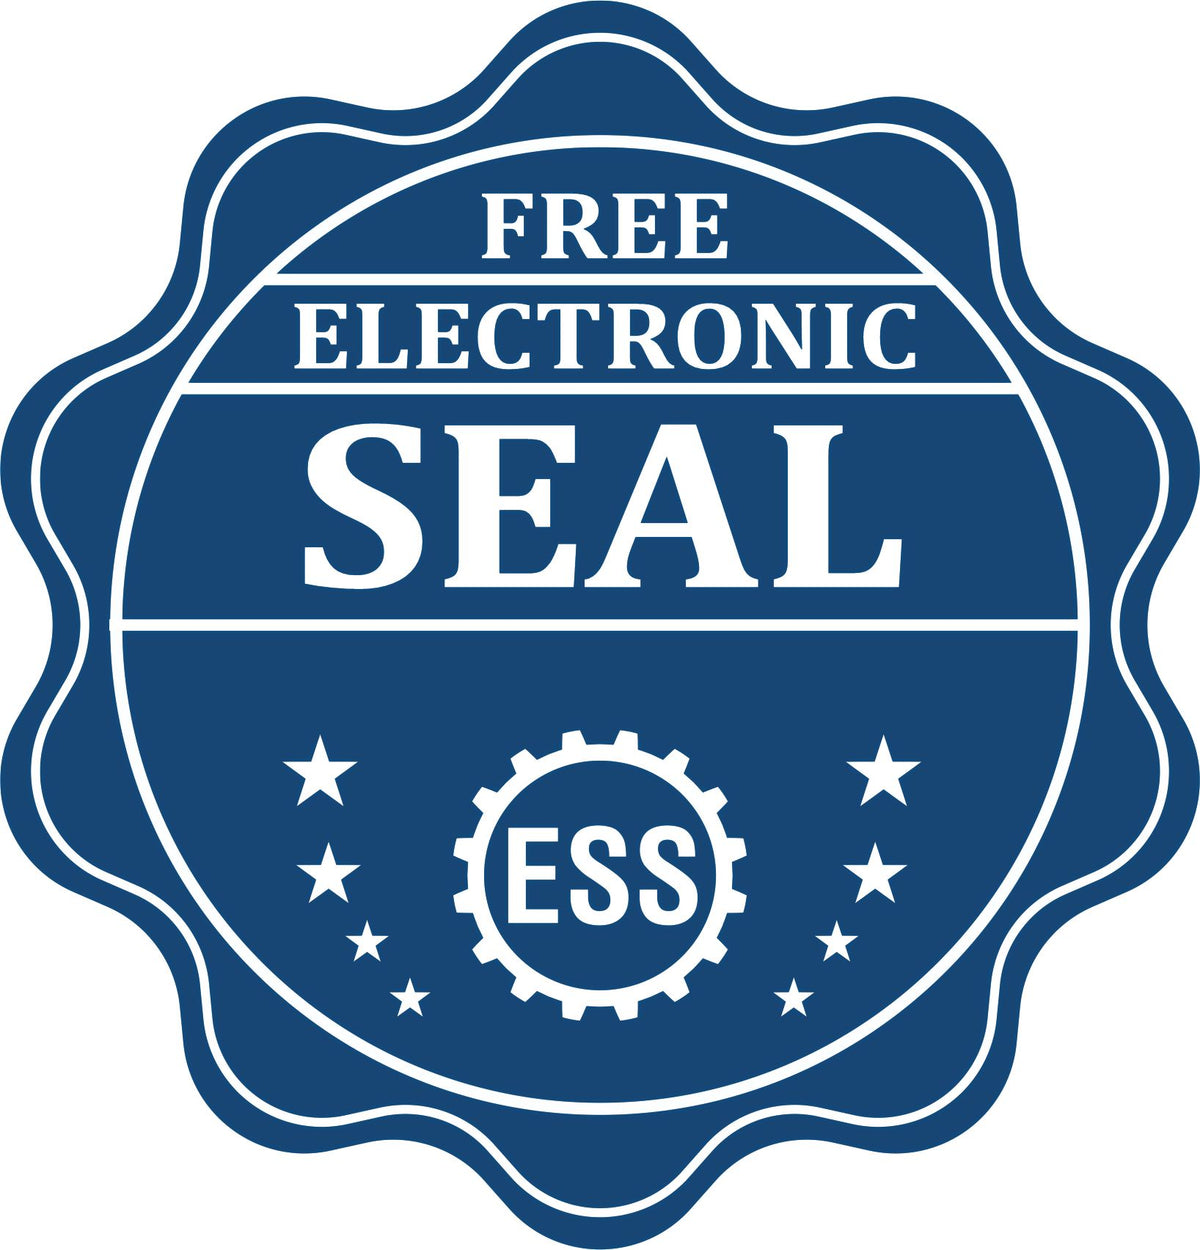 A badge showing a free electronic seal for the Heavy Duty Cast Iron Arkansas Engineer Seal Embosser with stars and the ESS gear on the emblem.